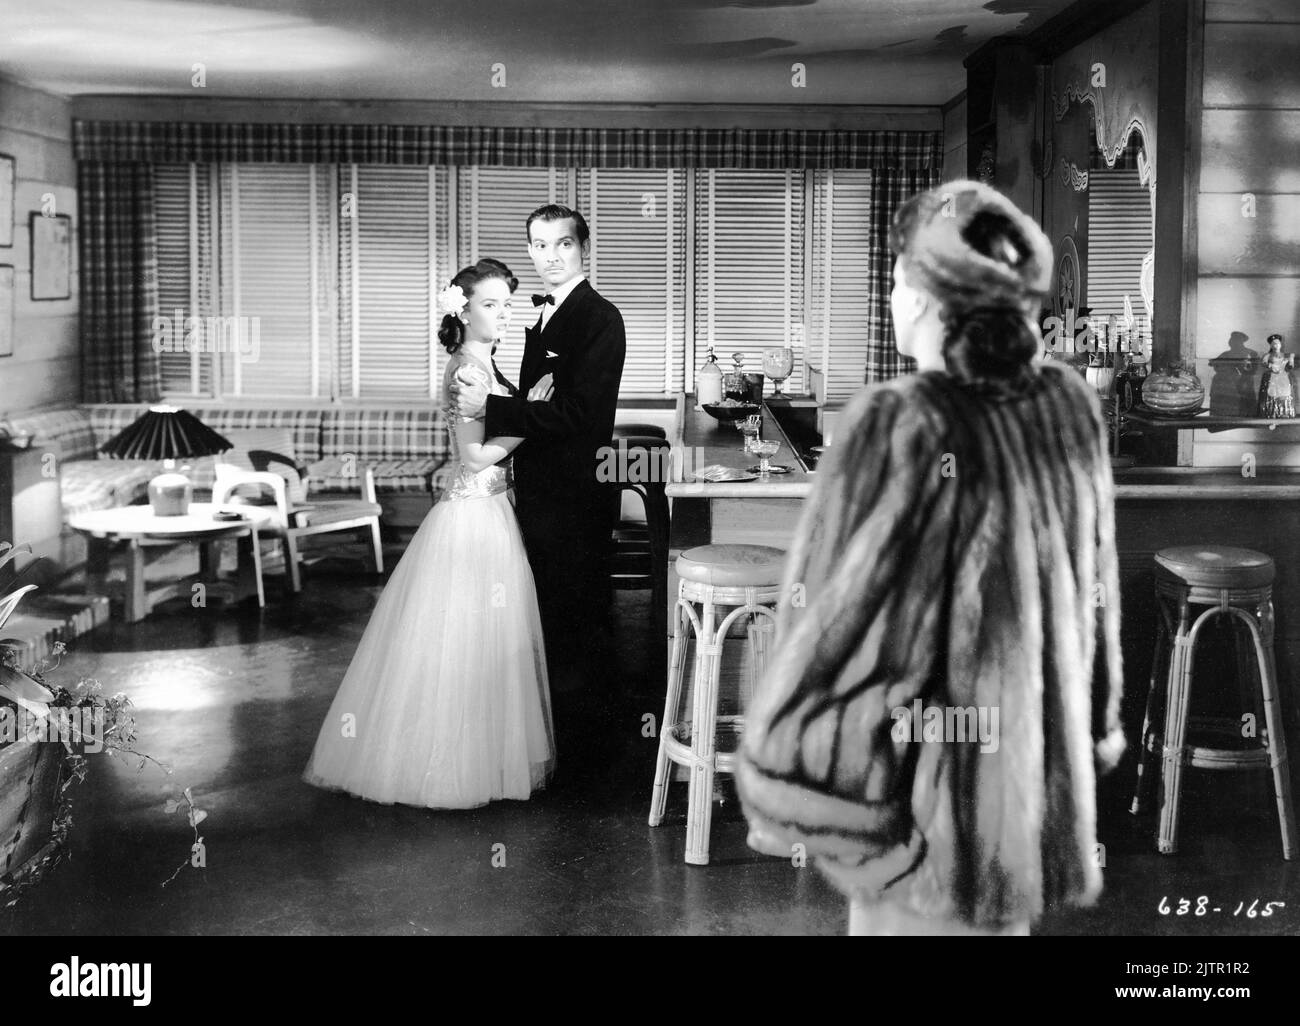 ANN BLYTH ZACHARY SCOTT and JOAN CRAWFORD in MILDRED PIERCE 1945 director MICHAEL CURTIZ novel James M. Cain music Max Steiner producer Jerry Wald Warner Bros. Stock Photo